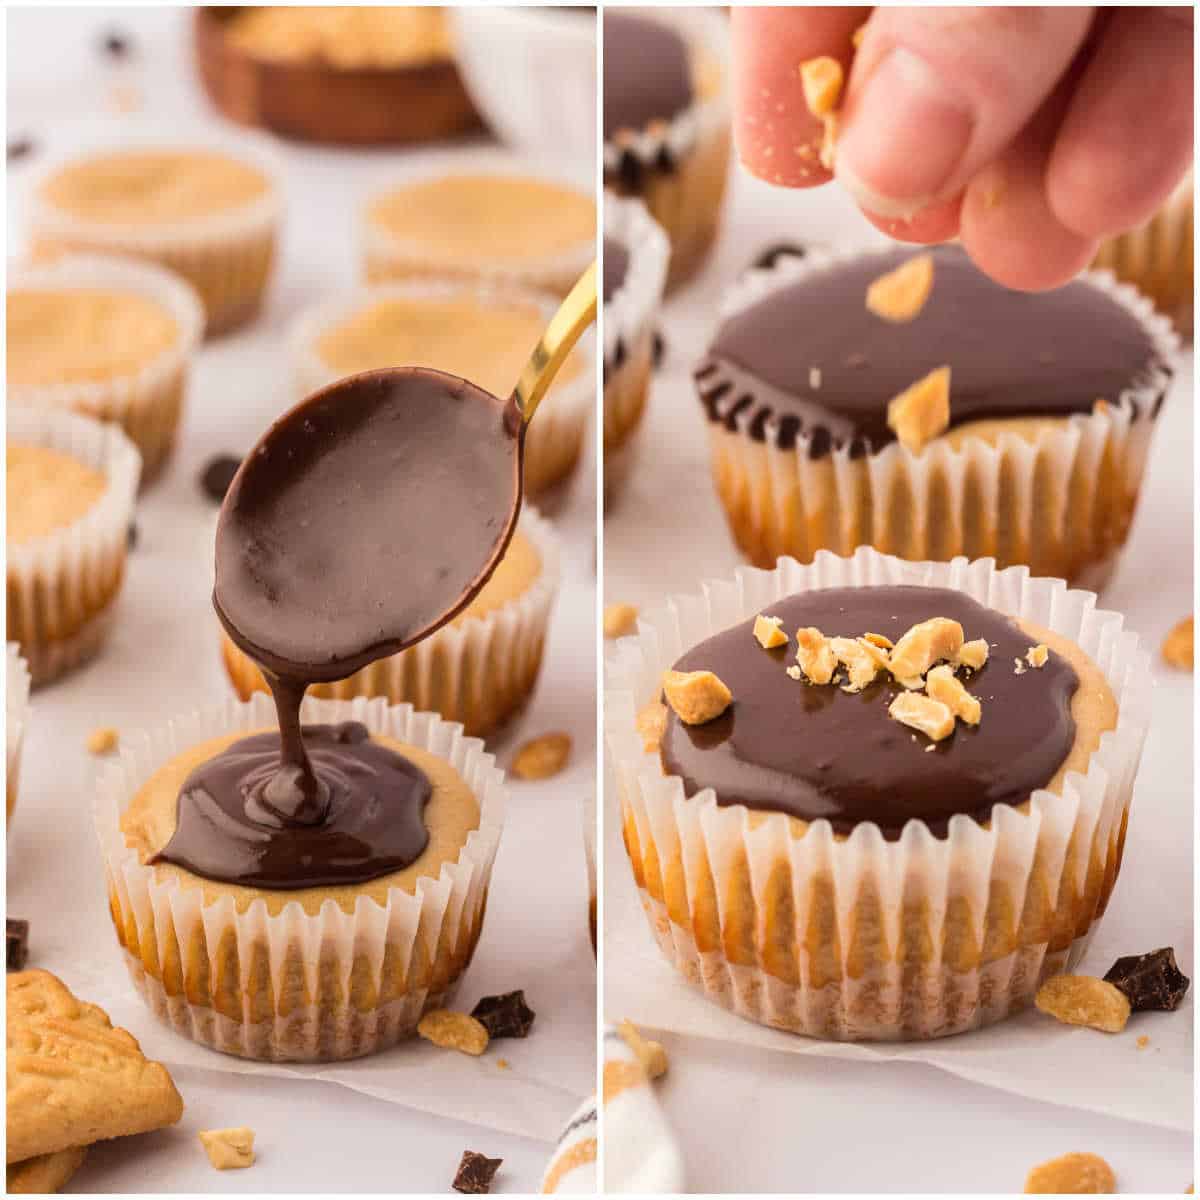 Steps to make mini peanut butter cheesecakes.